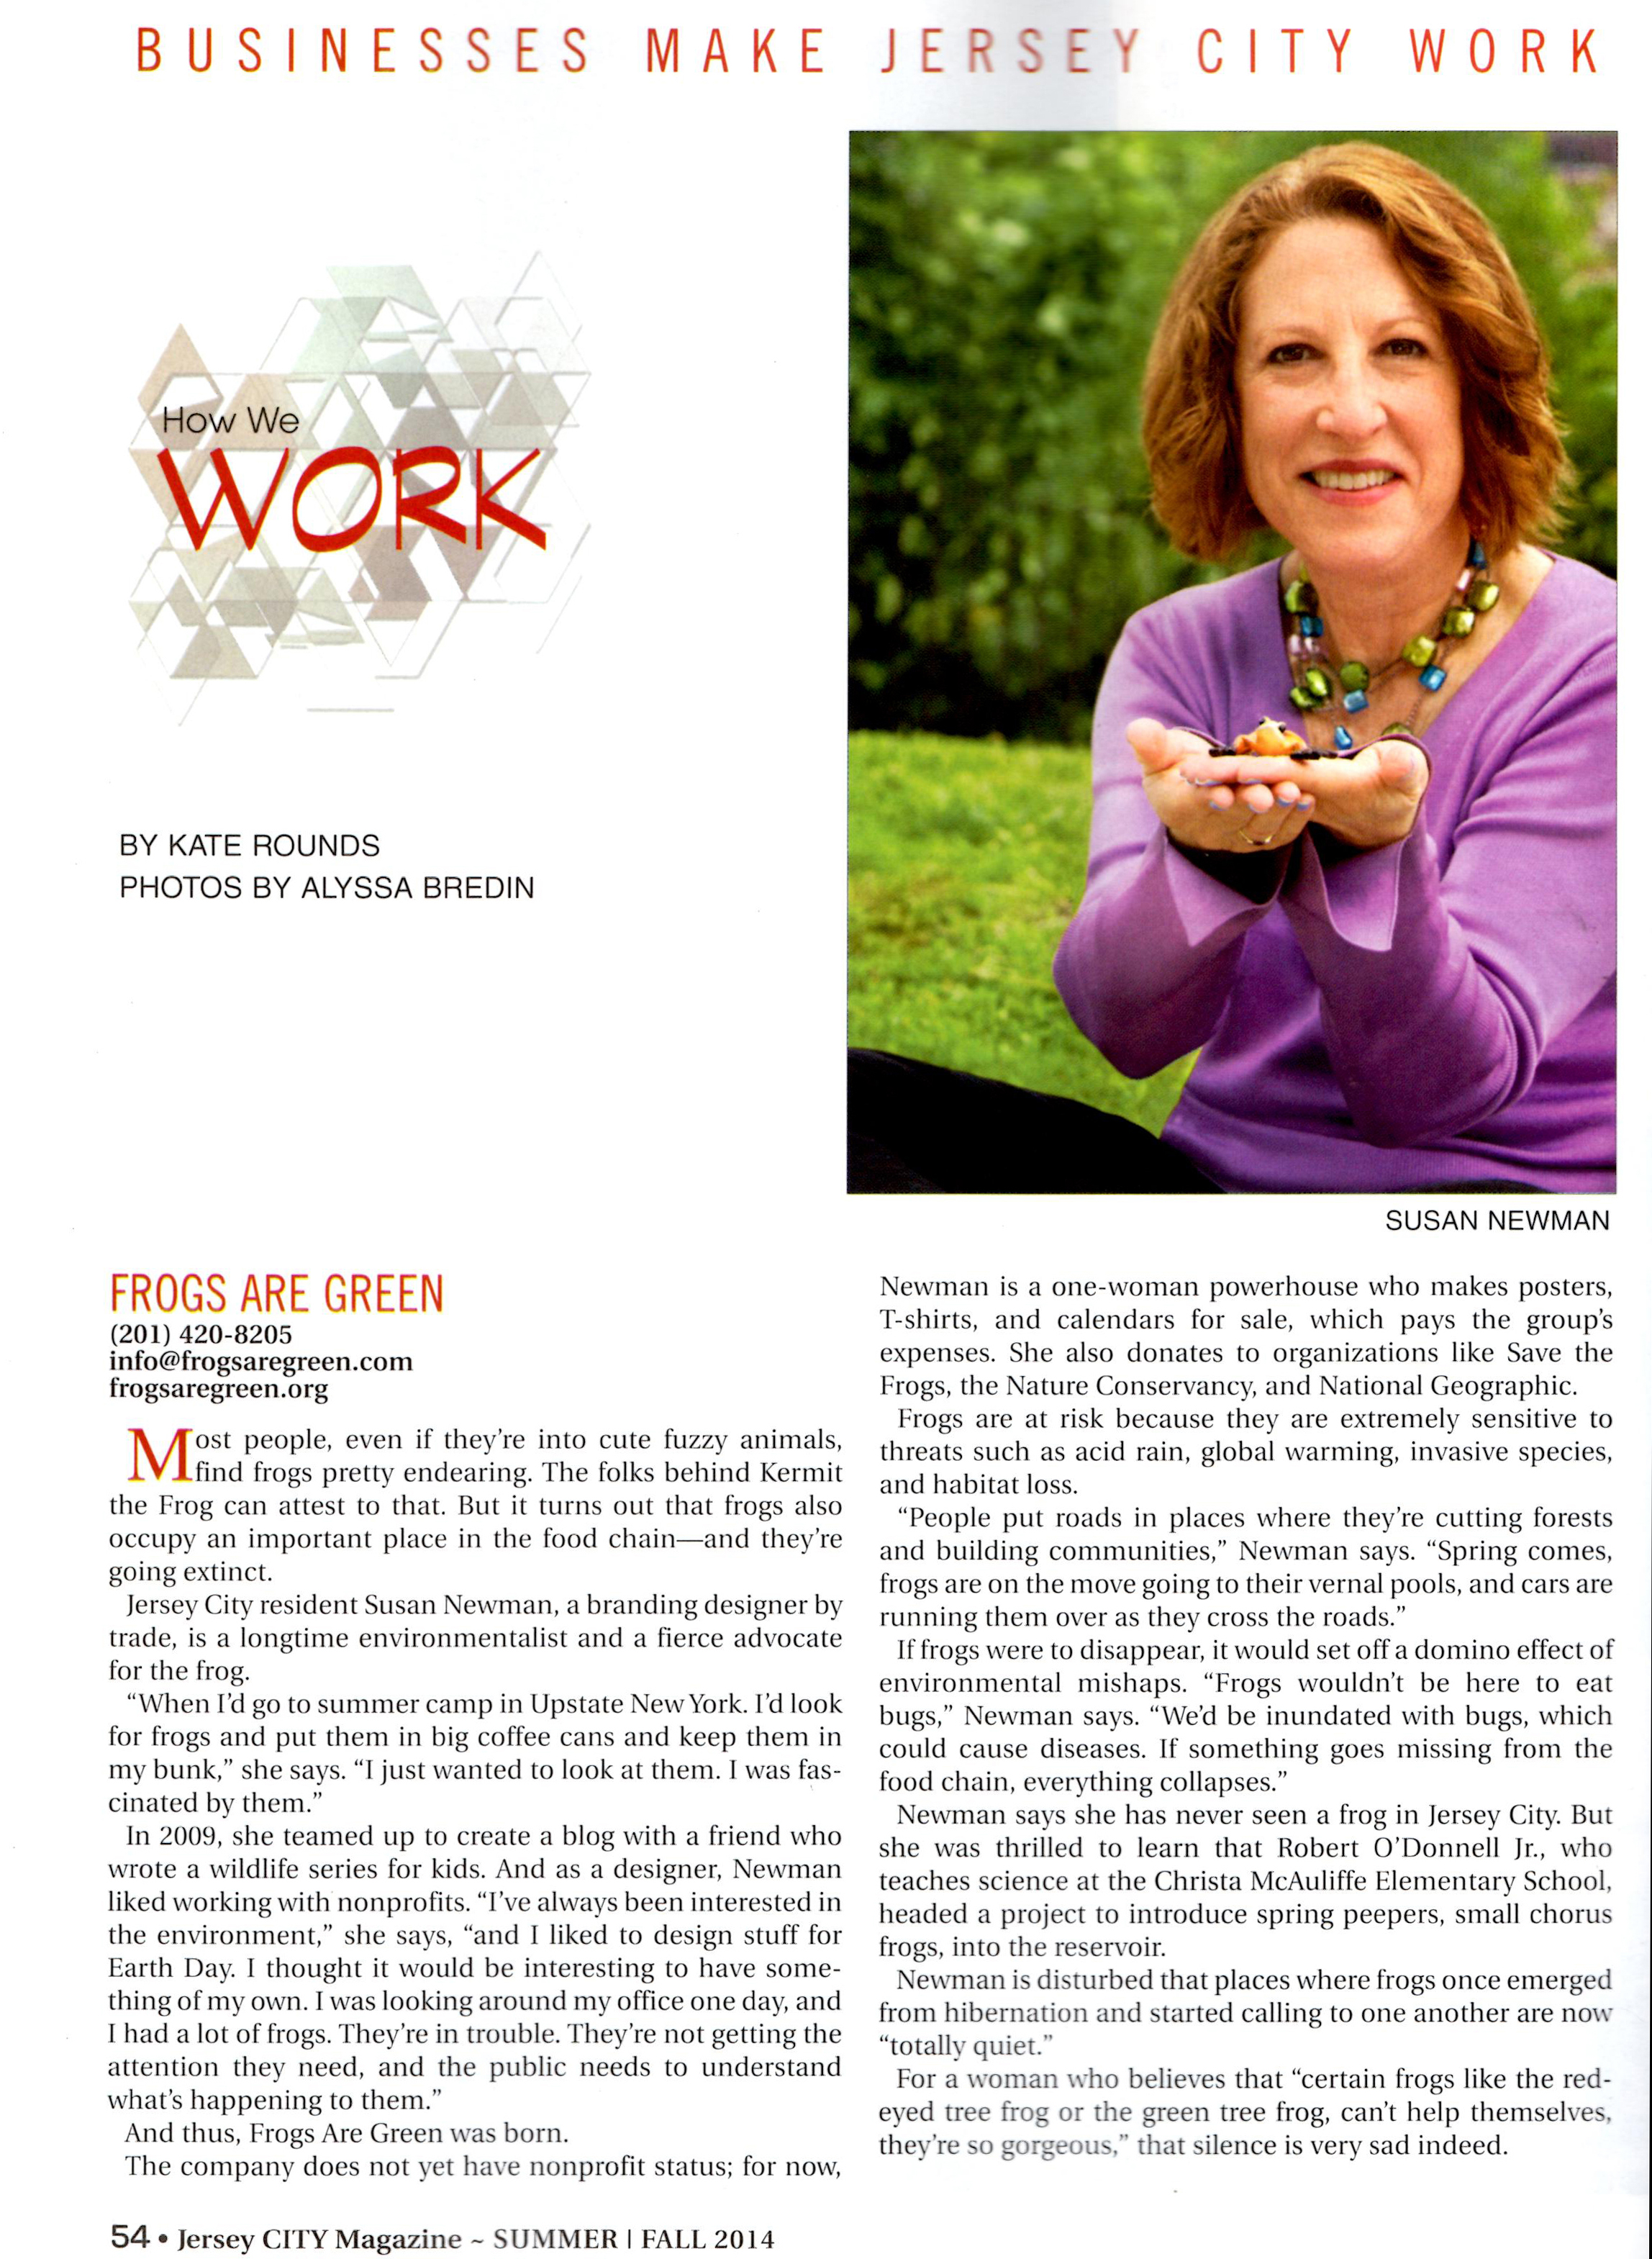 Susan Newman, founder of Frogs Are Green interviewed for Jersey City Magazine, Summer/Fall 2014 Issue